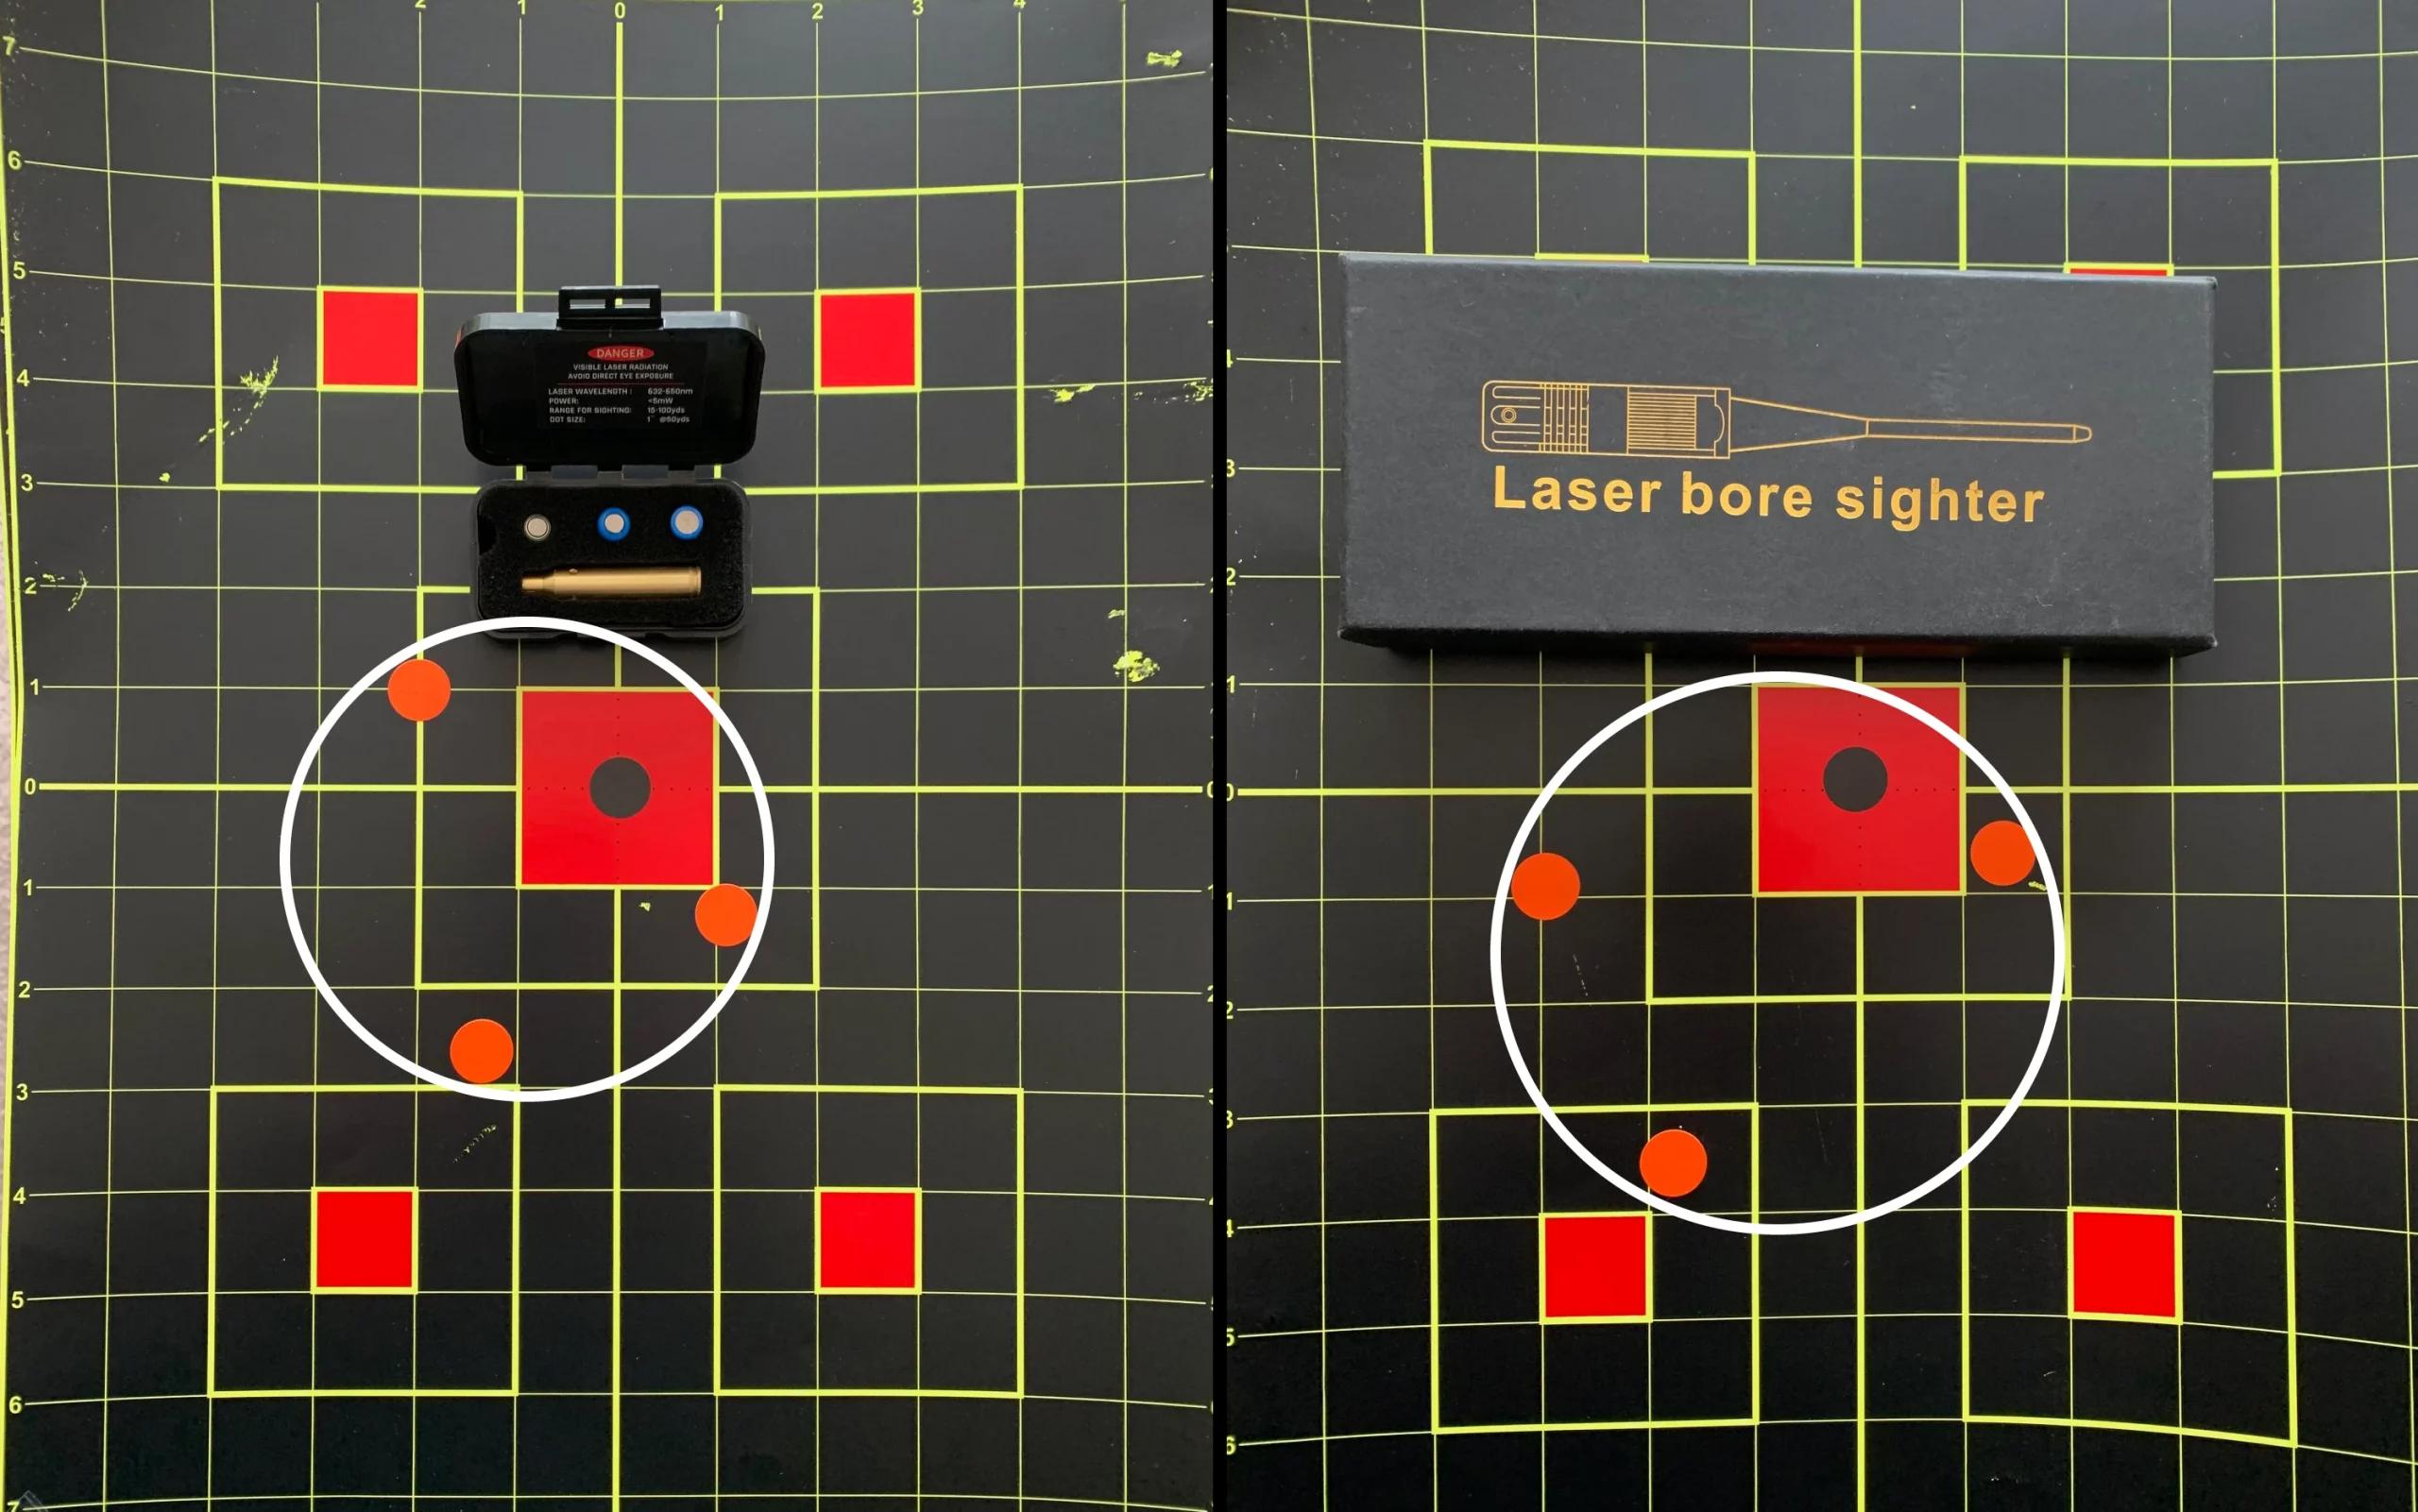 A comparison of 20 yard laser placements between cartridge-based (left) and insert-based (right) boresighters. The cartridge style products are, in my experience more accurate than insert-based, but they're also more expensive. 